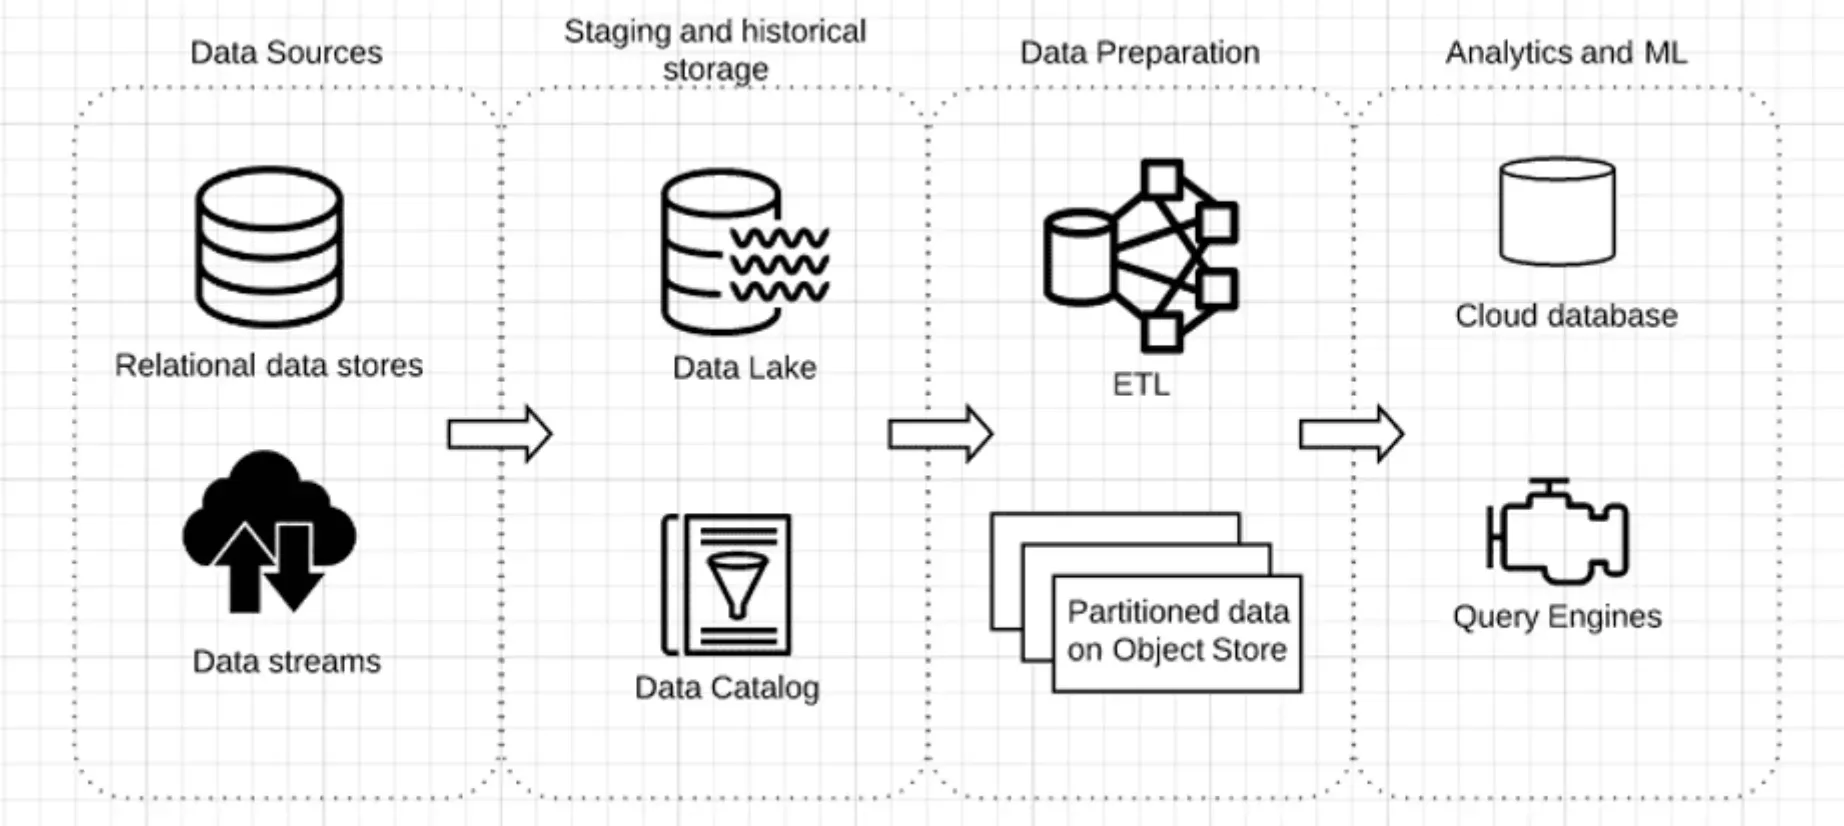 Data Warehouses in Legacy systems